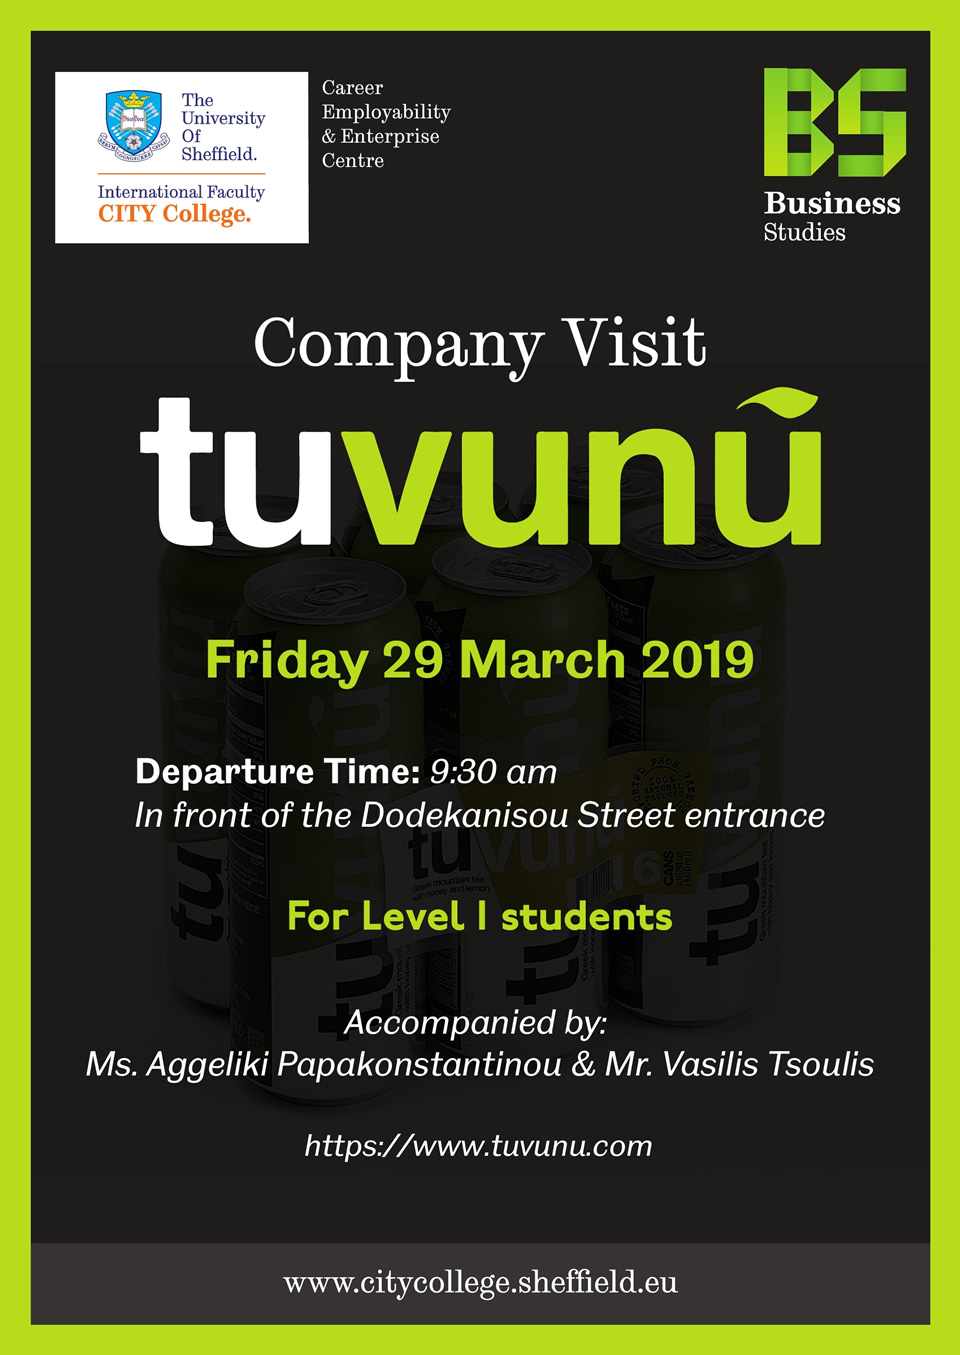 Company Visit to tuvunu by Business students